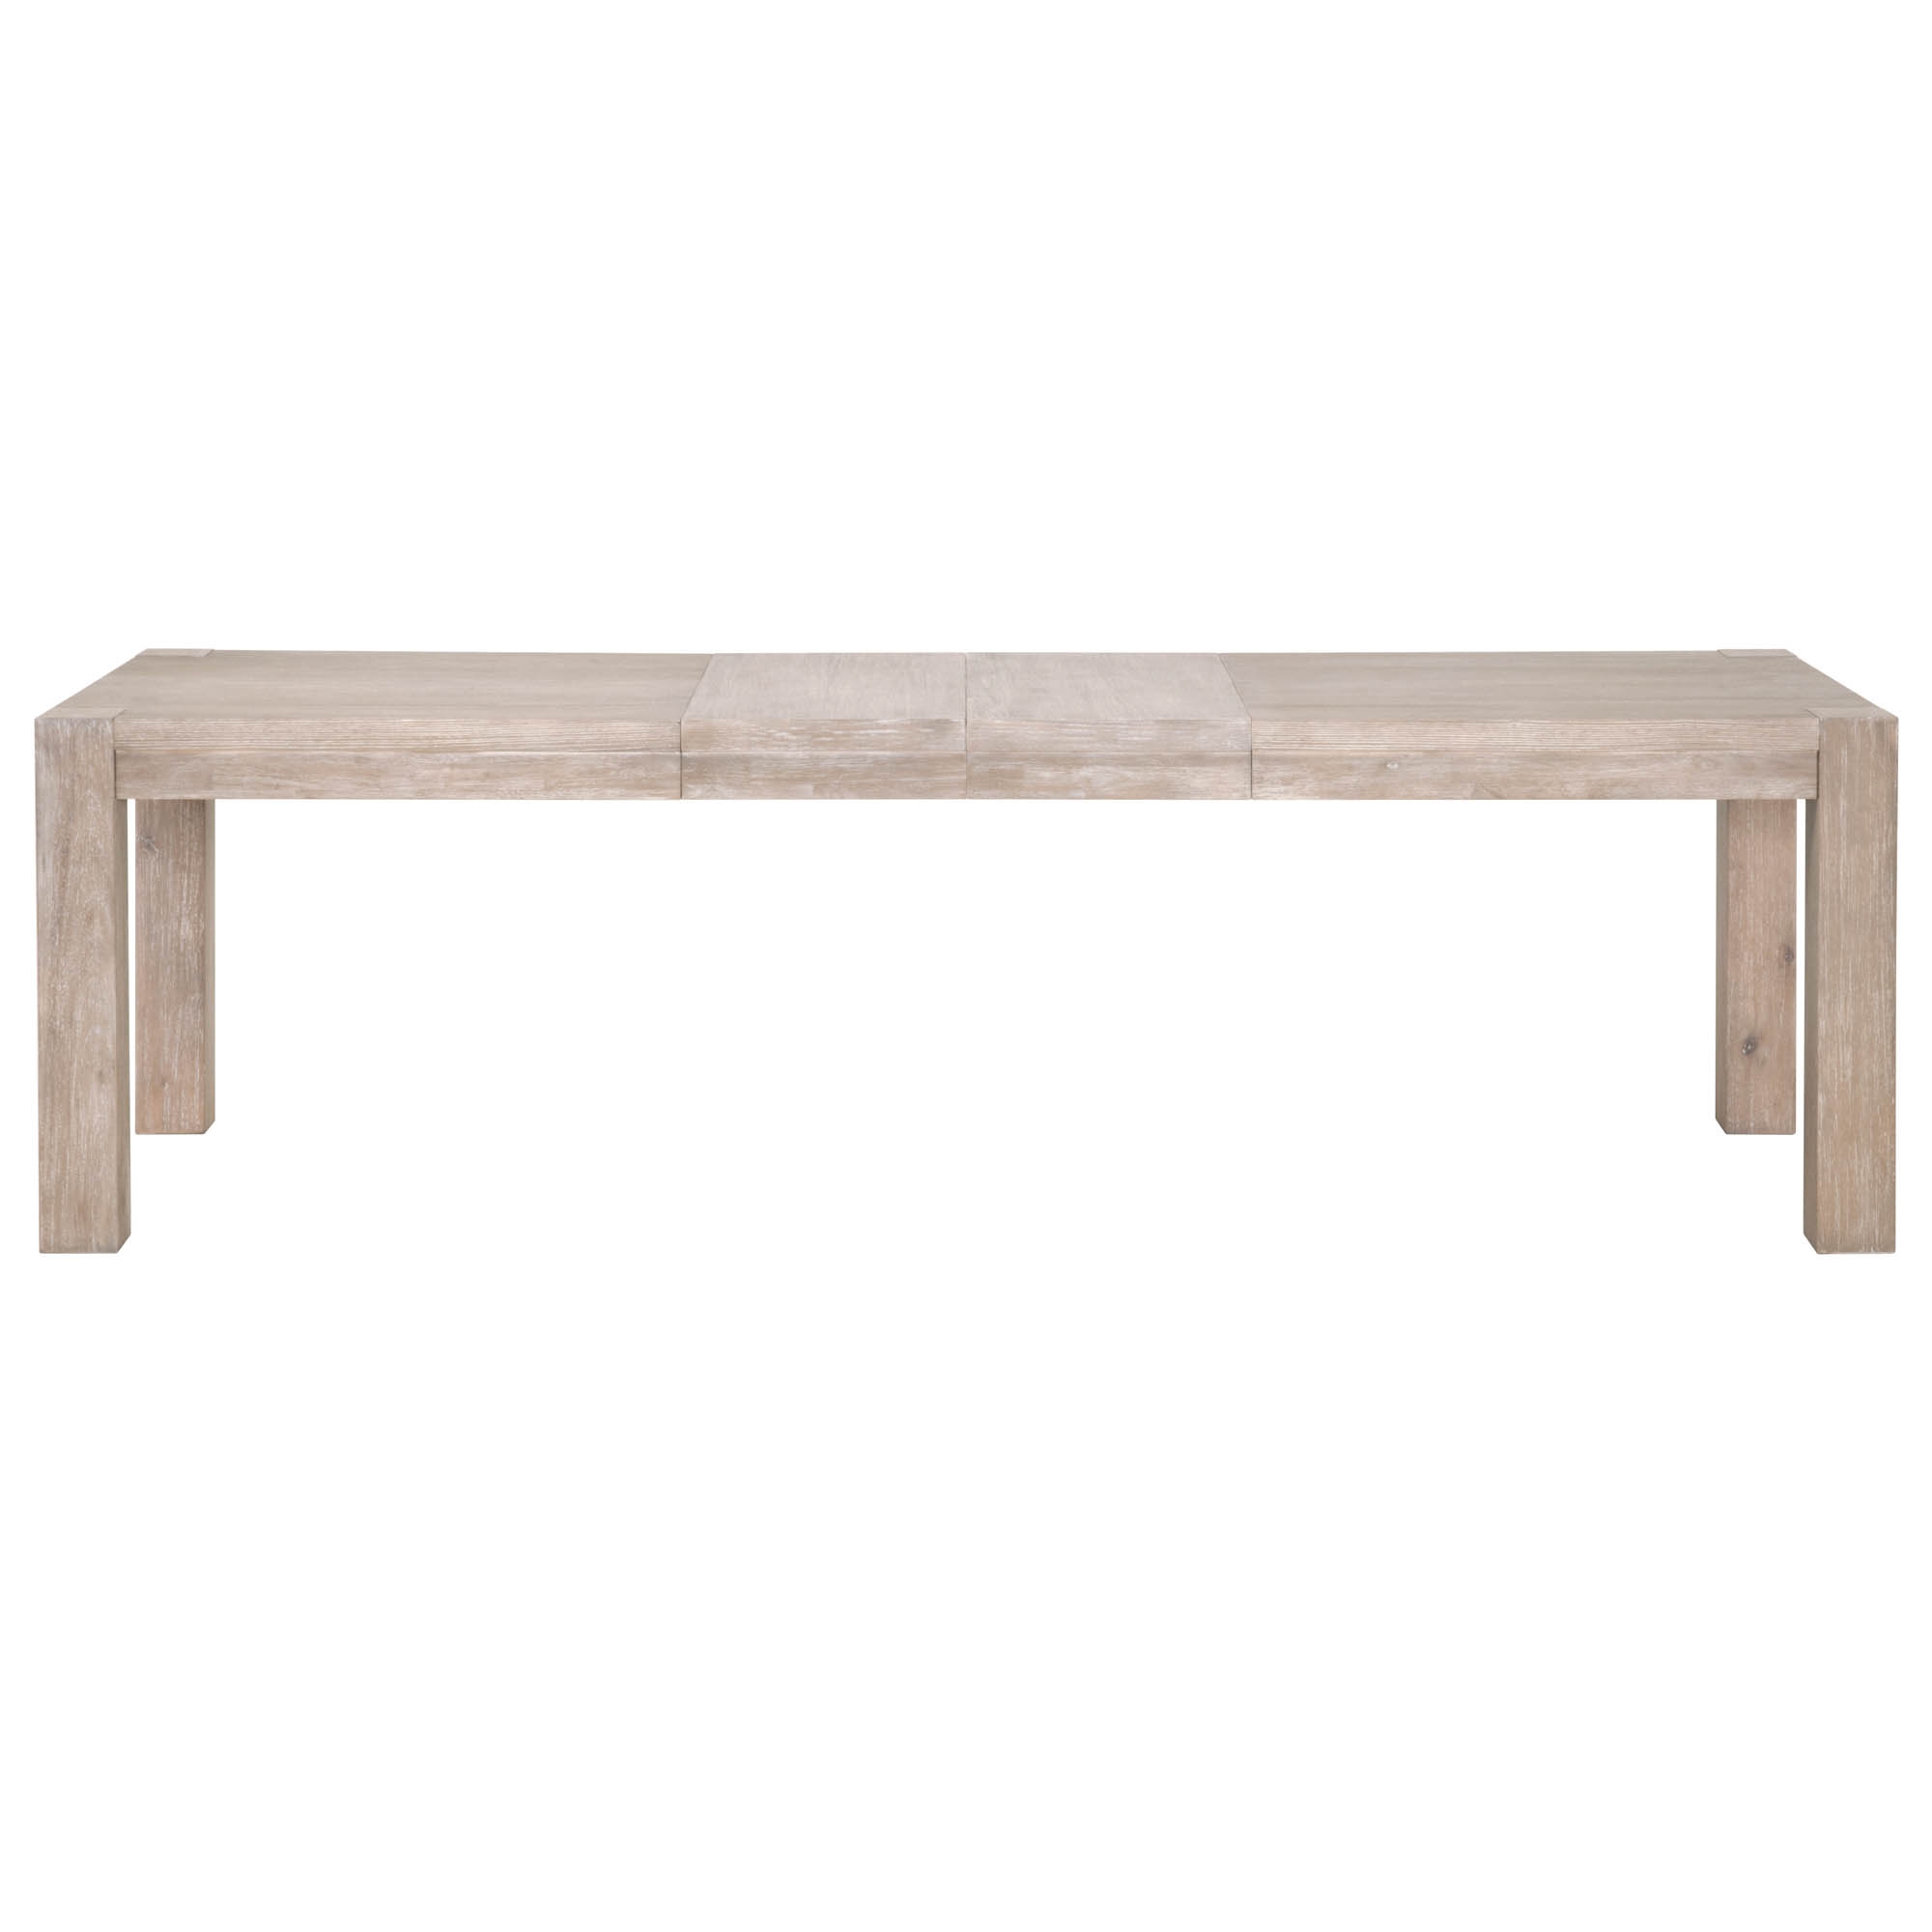 Adler Extension Dining Table - Image 0